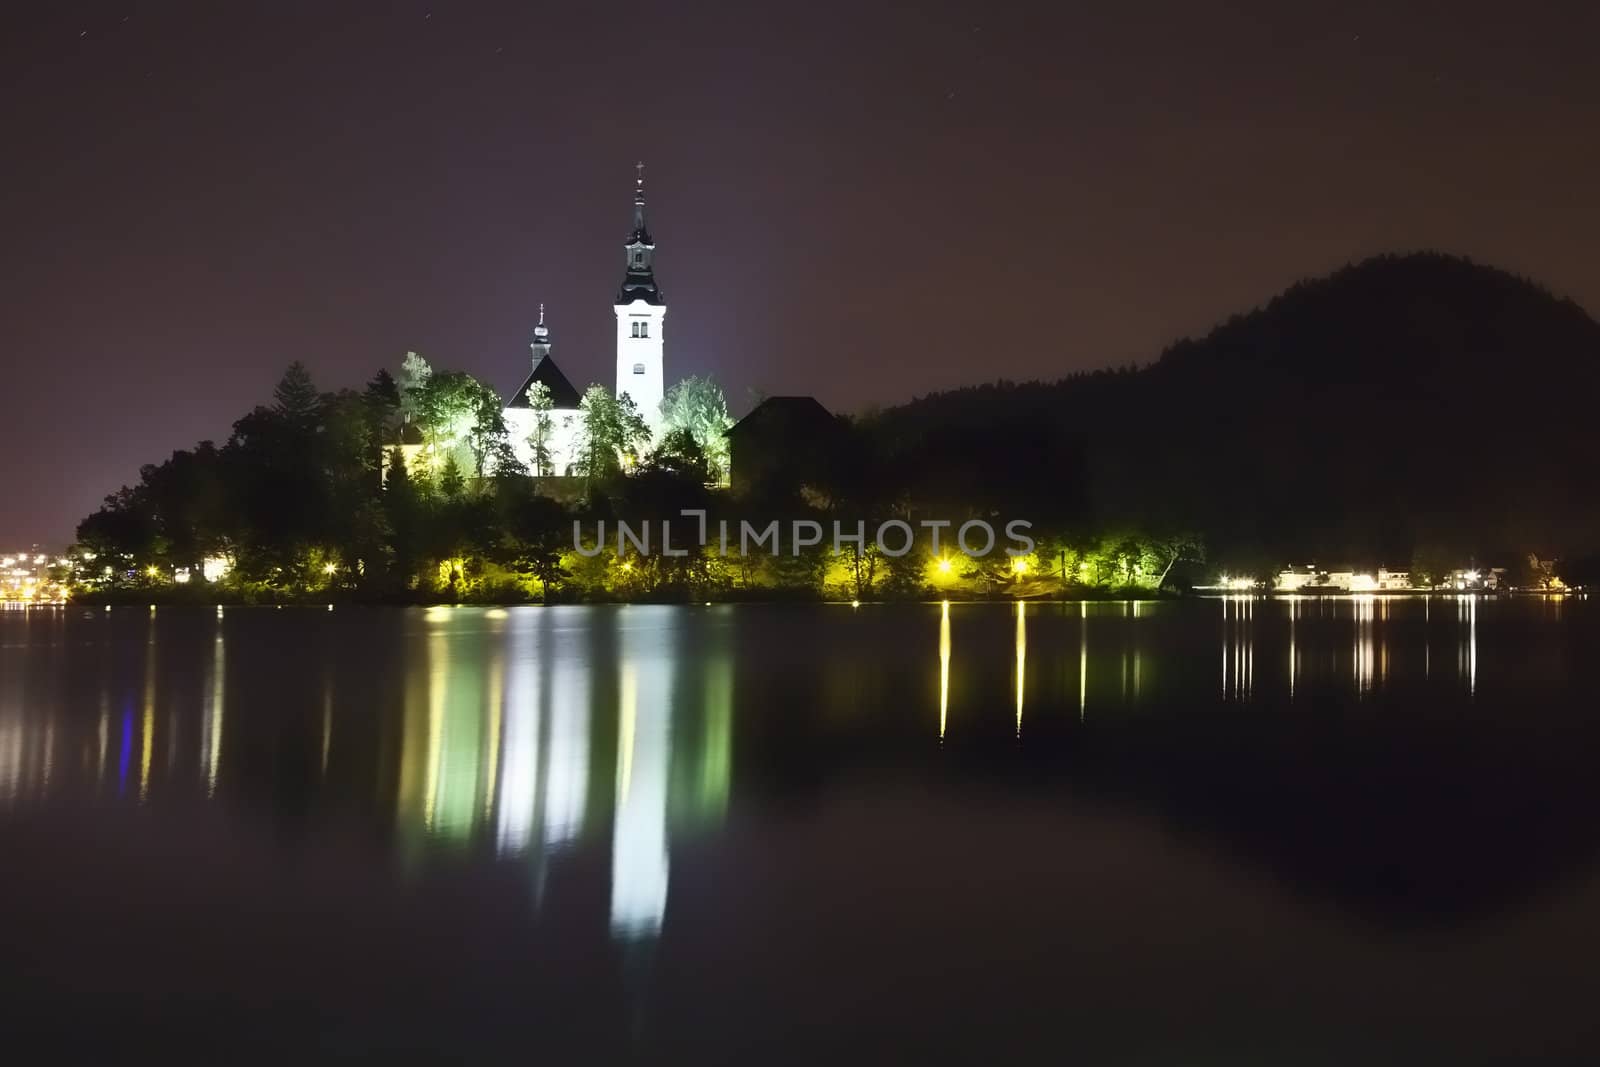 Night picture - Panorama of church on the island in Bled Lake - one of the most beautiful regions of Julian Alps in Slovenia